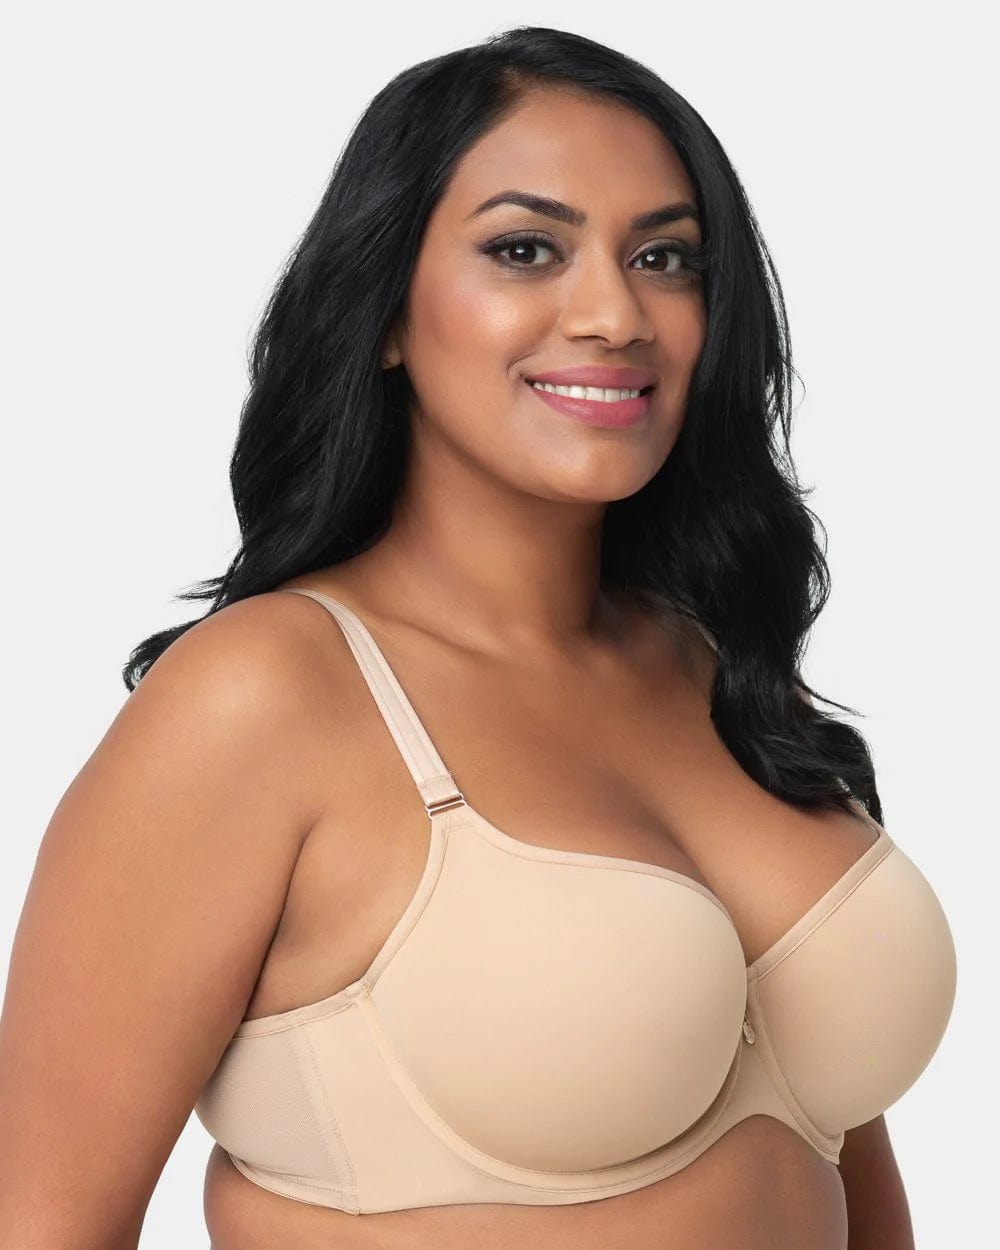 Moscow Country Bride Push-Up Bra 